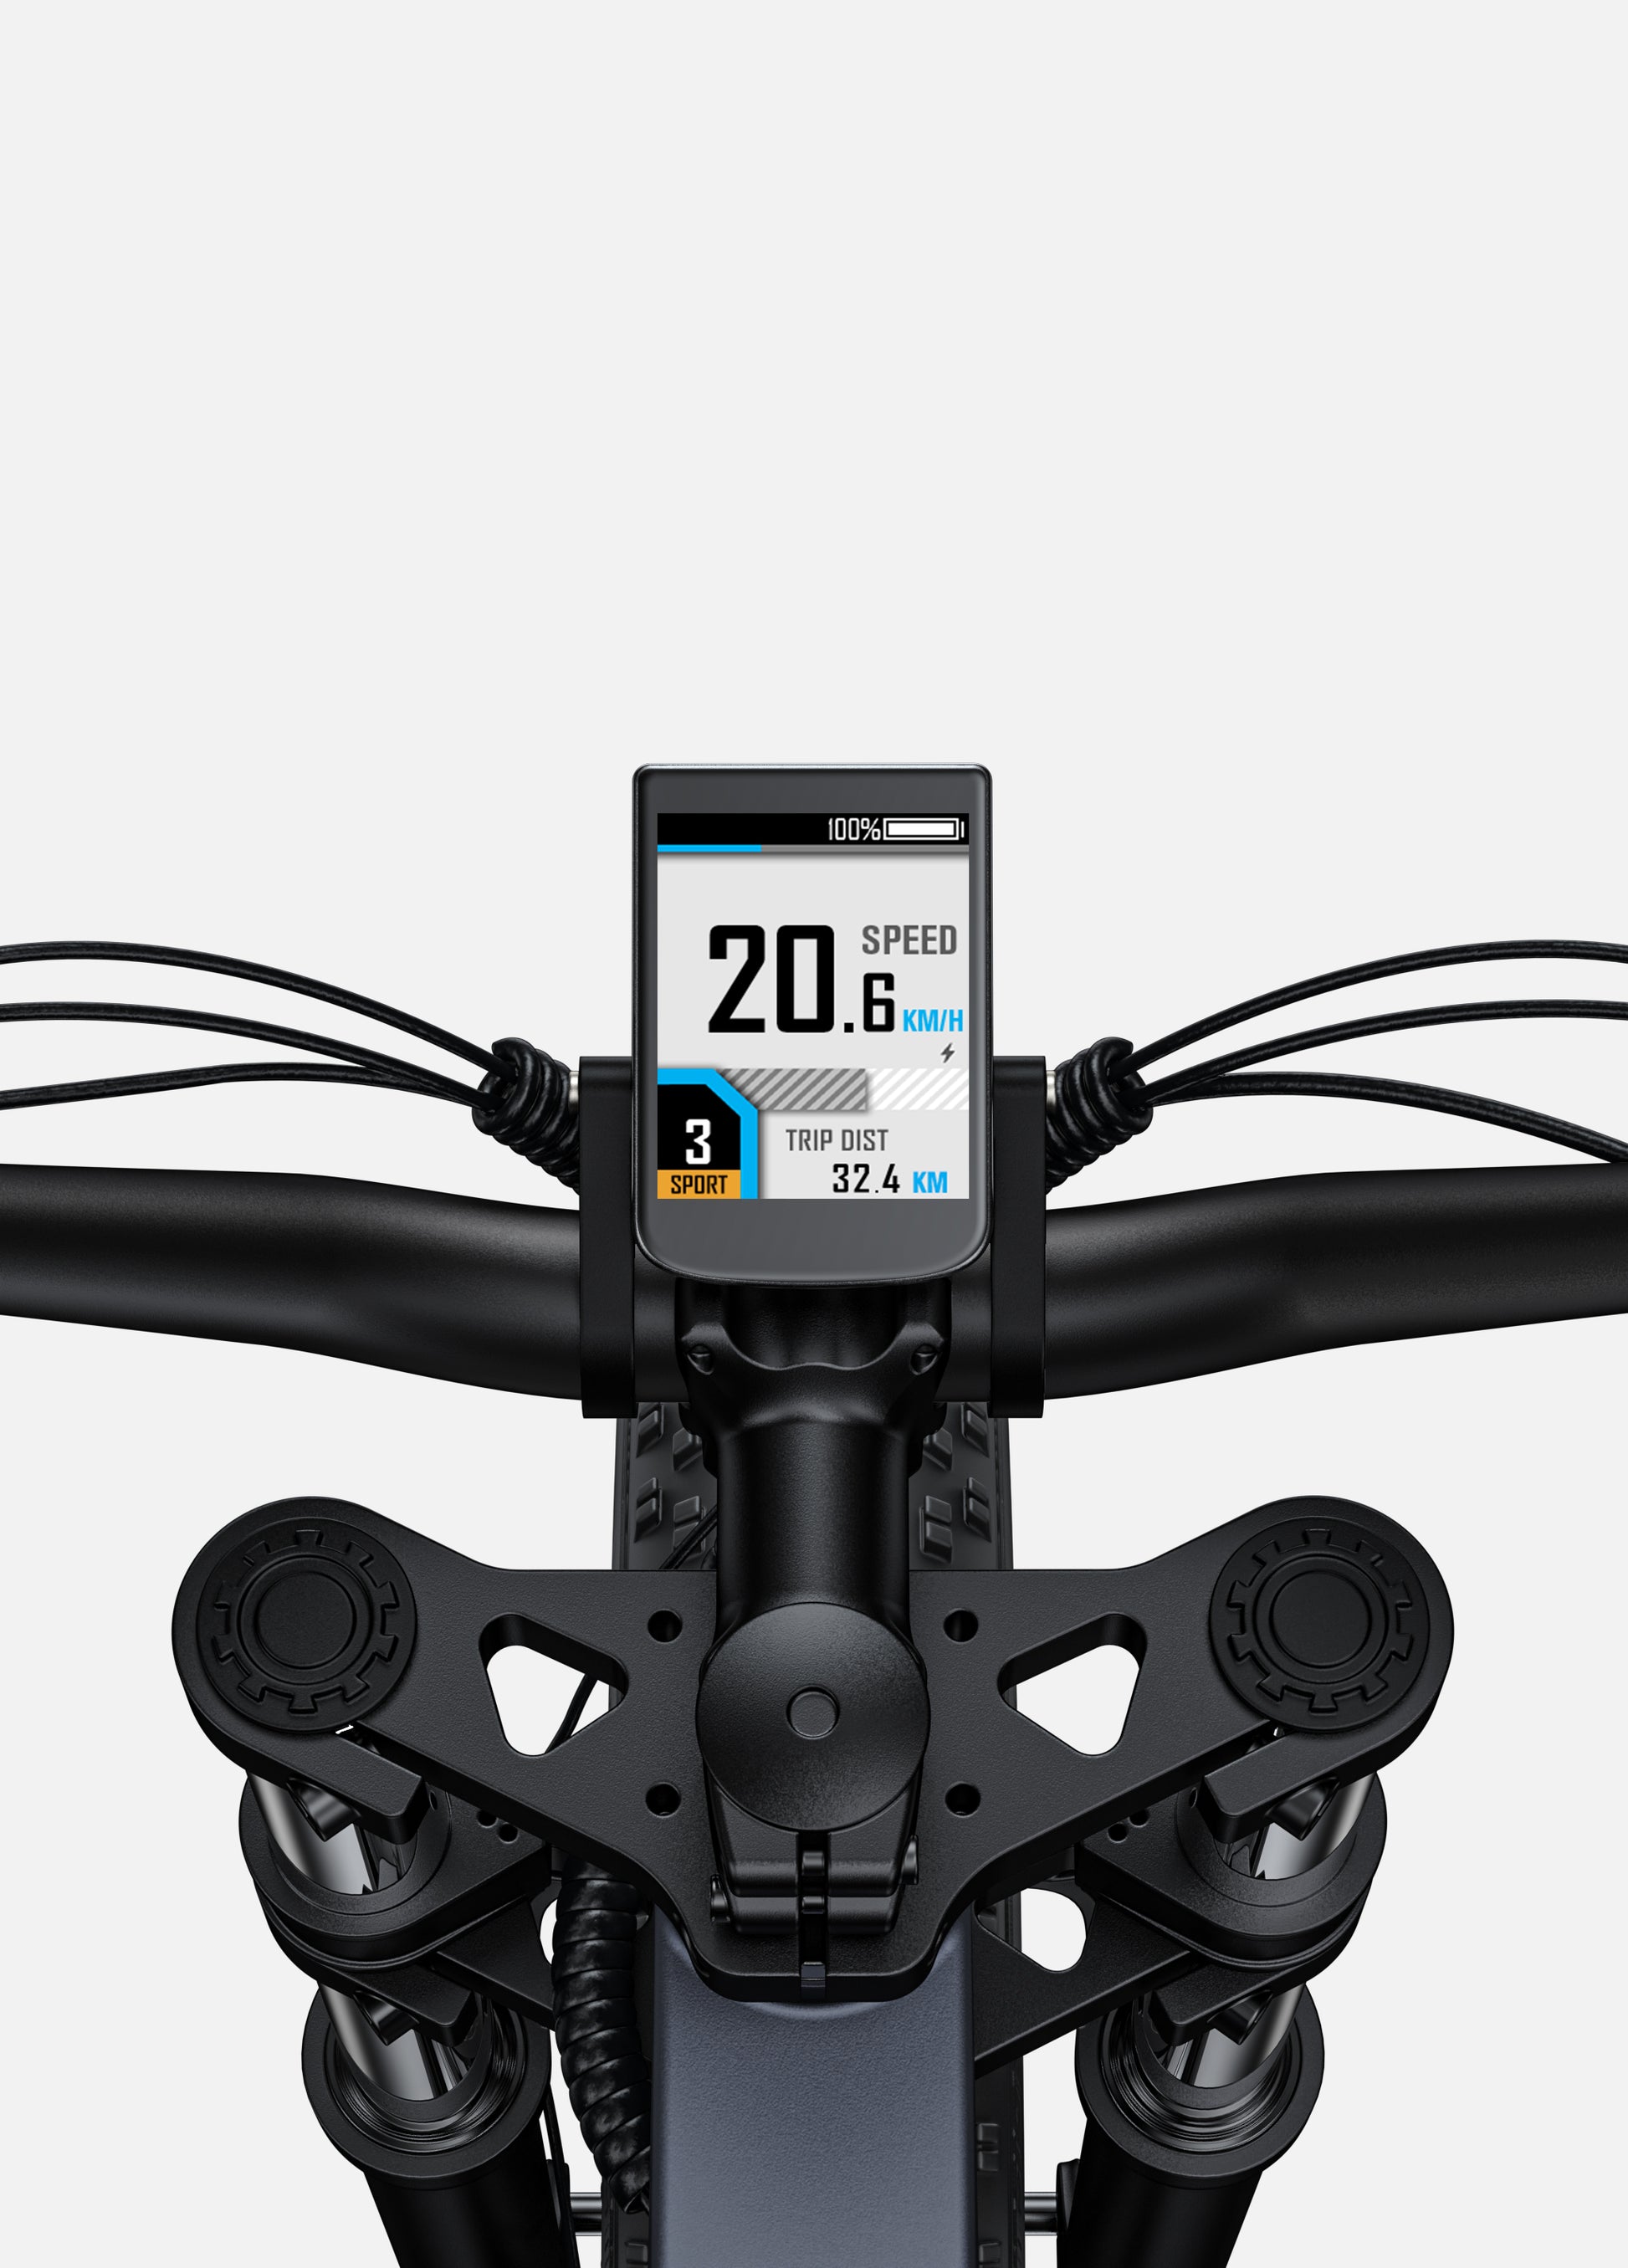 Engwe X26 electric bike's digital display mounted on handlebars, showing speed and trip details for rider convenience.